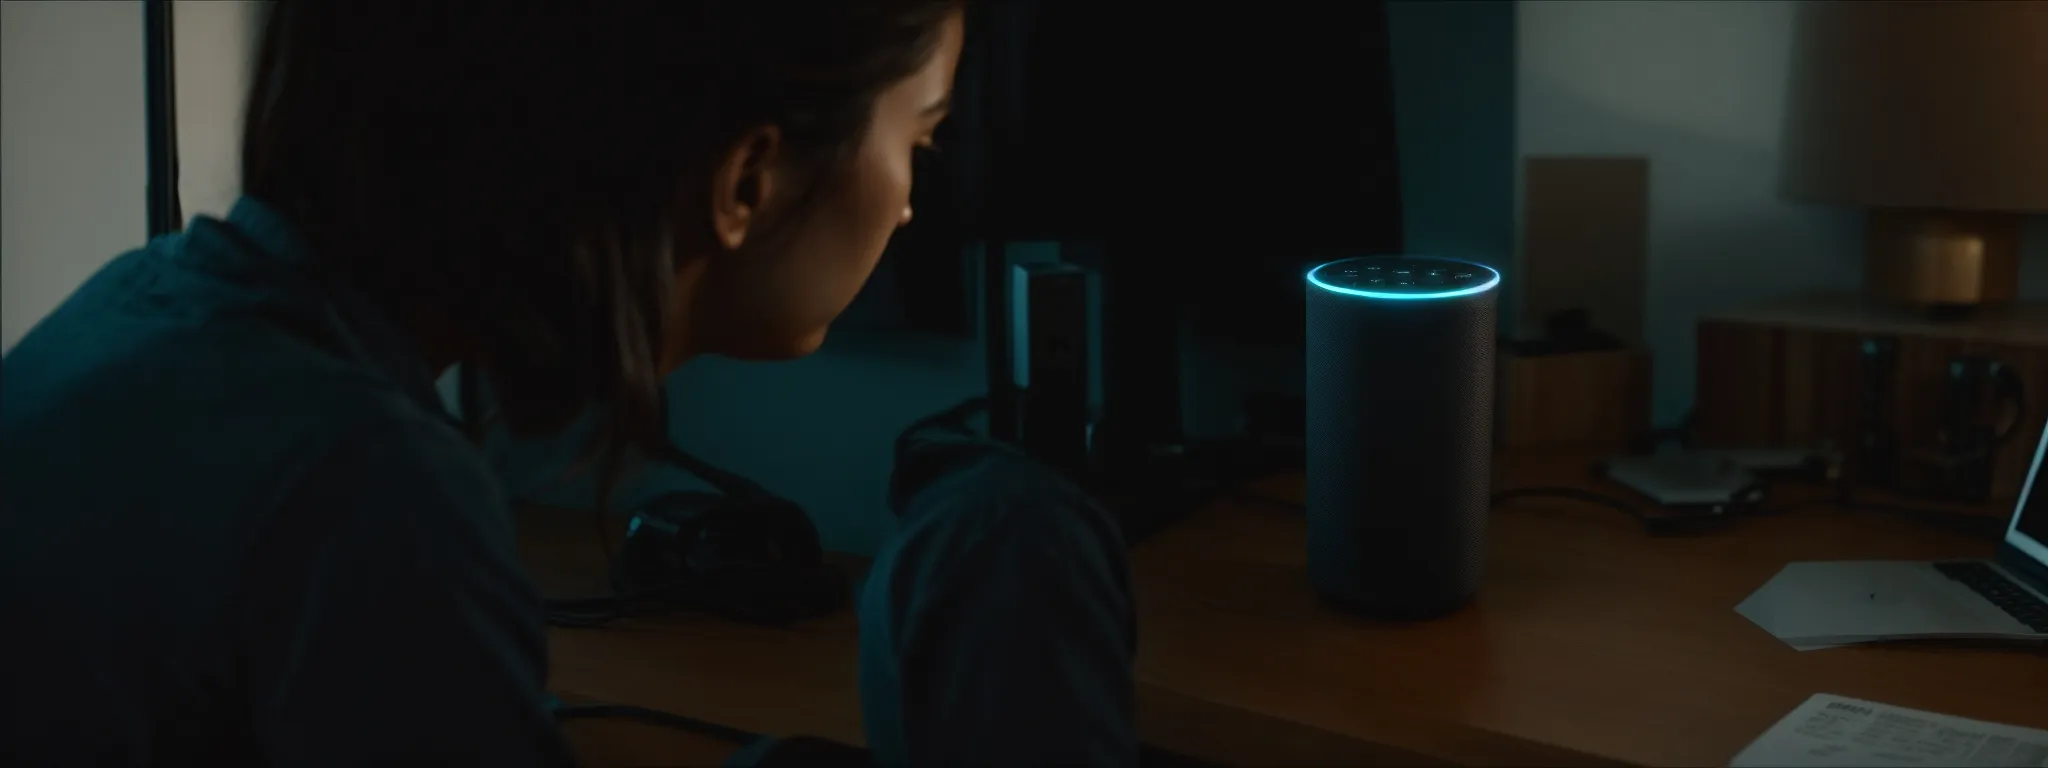 a person talks to a smart speaker on a desk, illuminating voice interaction with technology.